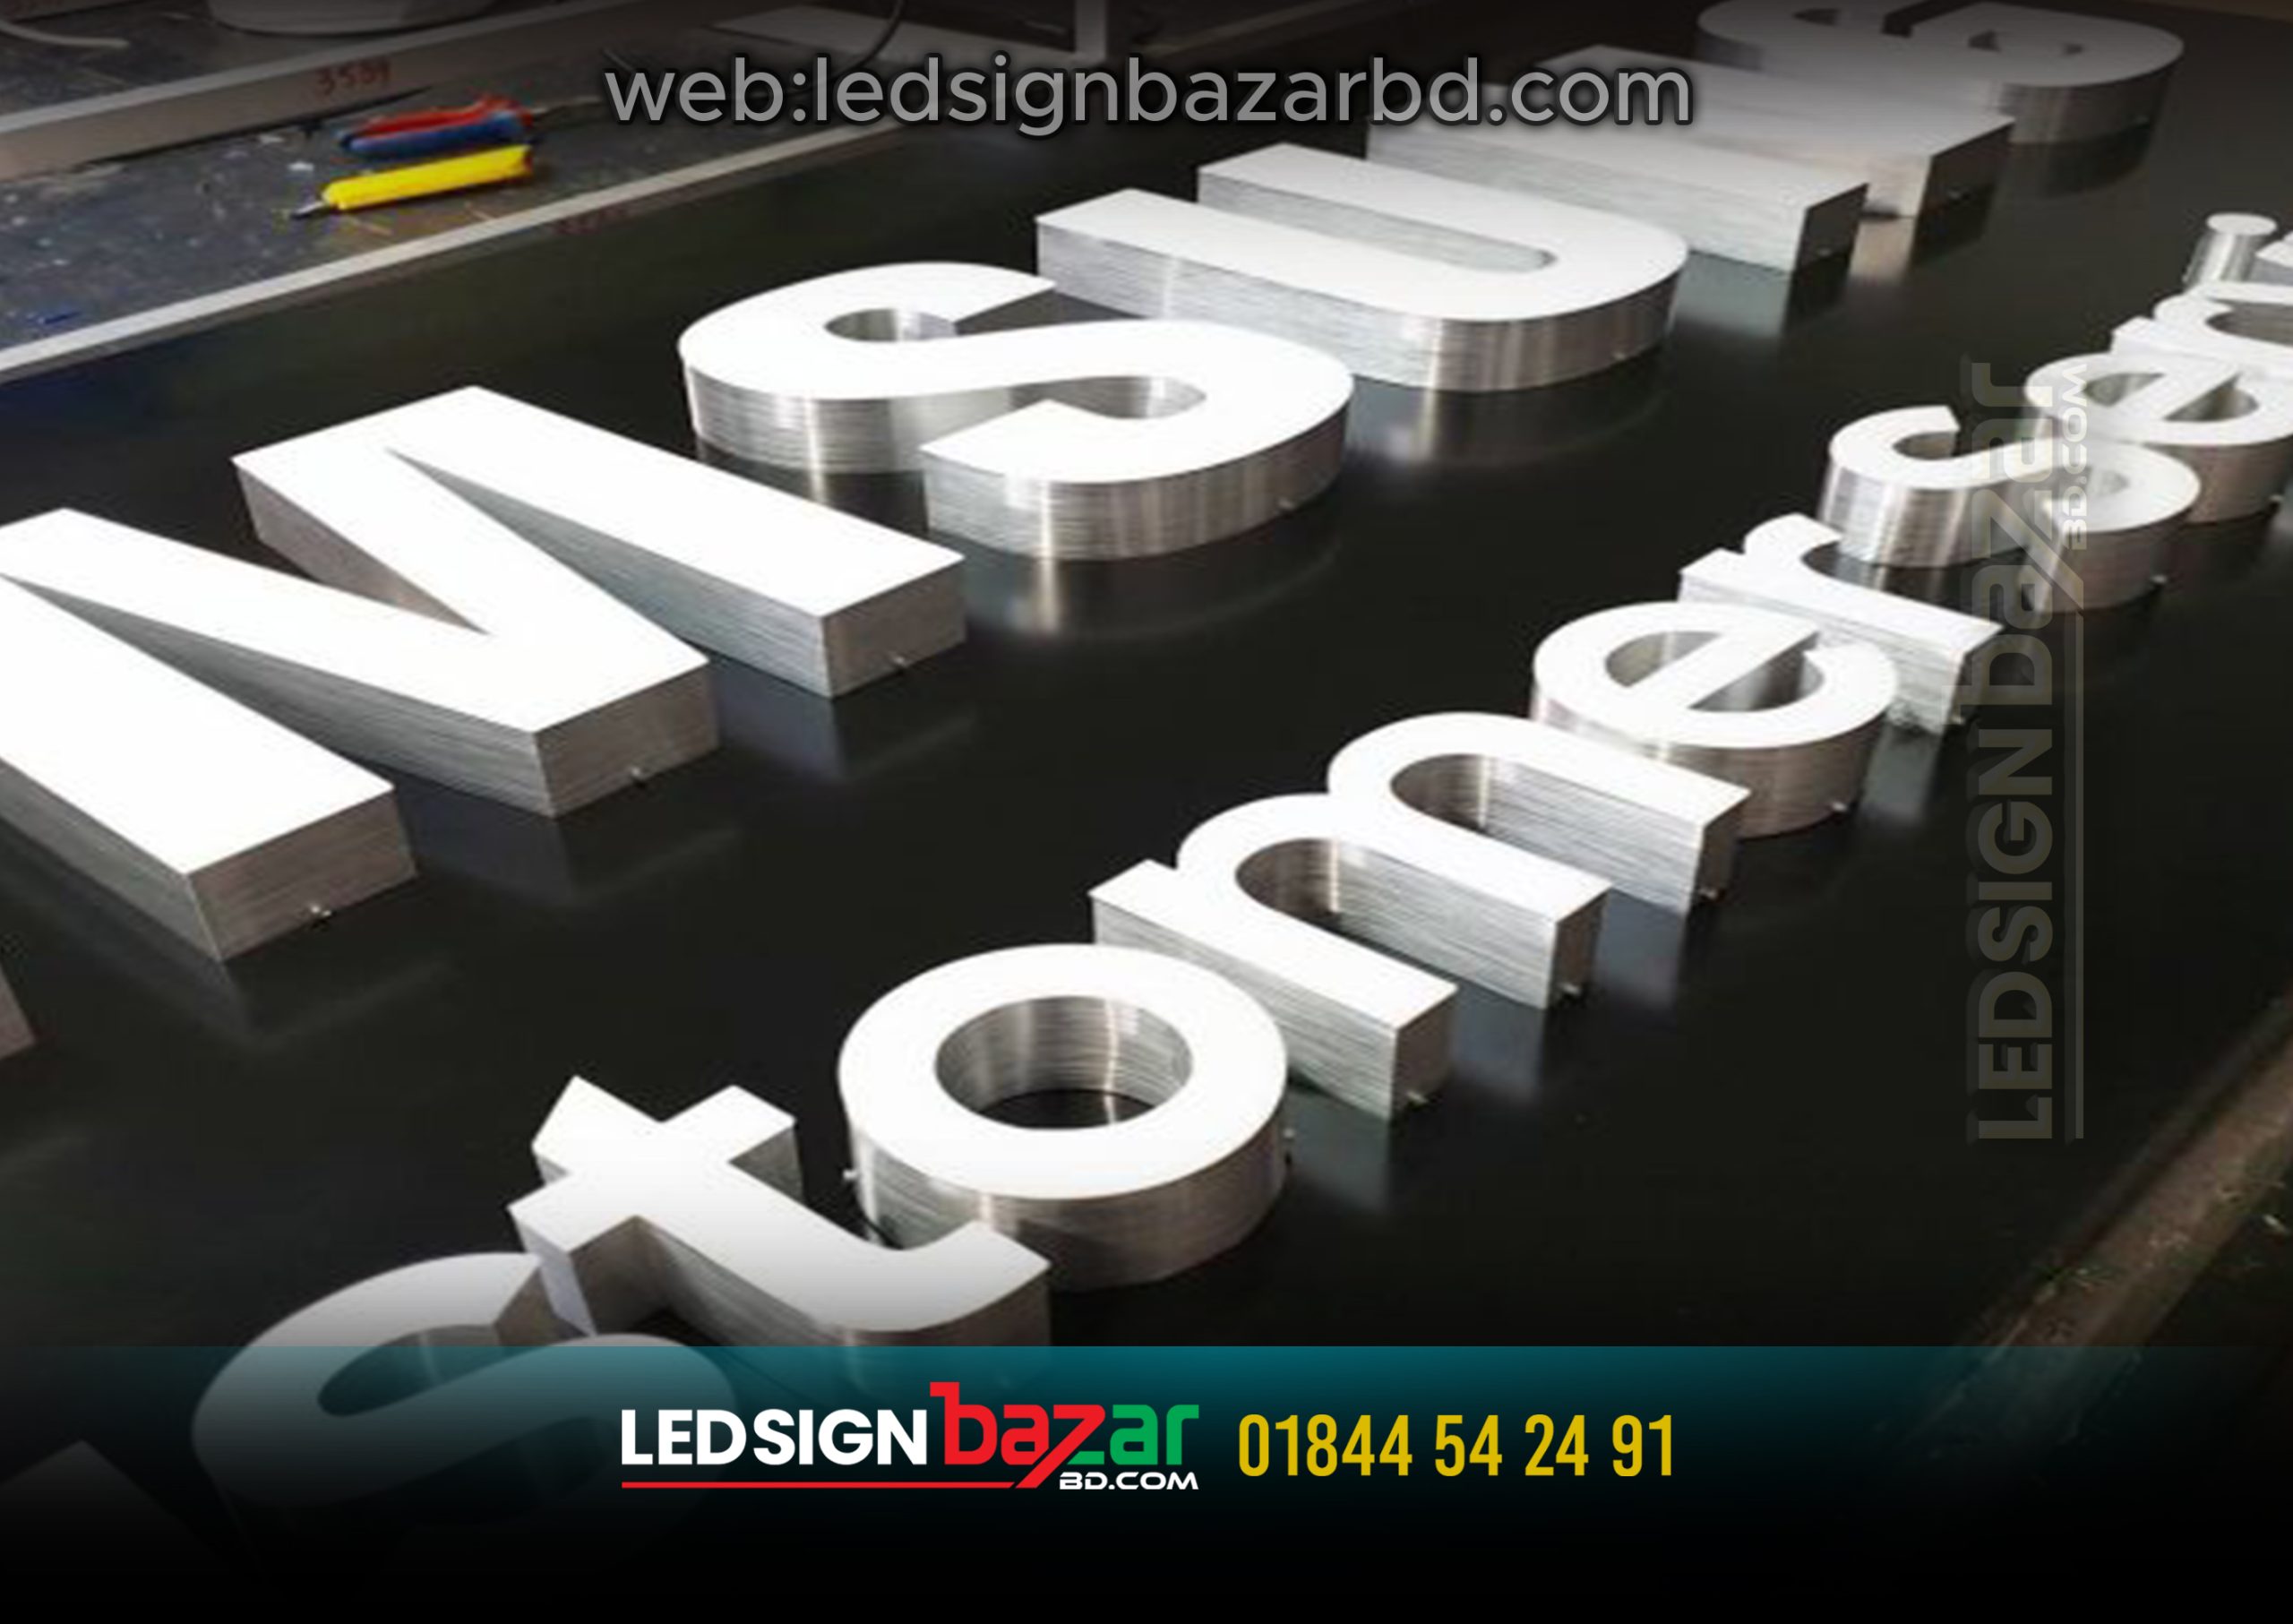 MS SUMS STOMER SERVICE BD, ACRYLIC 3D LIGHTING SIGNBOARD BD, LETTER SIGNAGE BD, SIGNBOARD FACTORY BD, SHOP SIGN BD, NEON SIGNS BD.